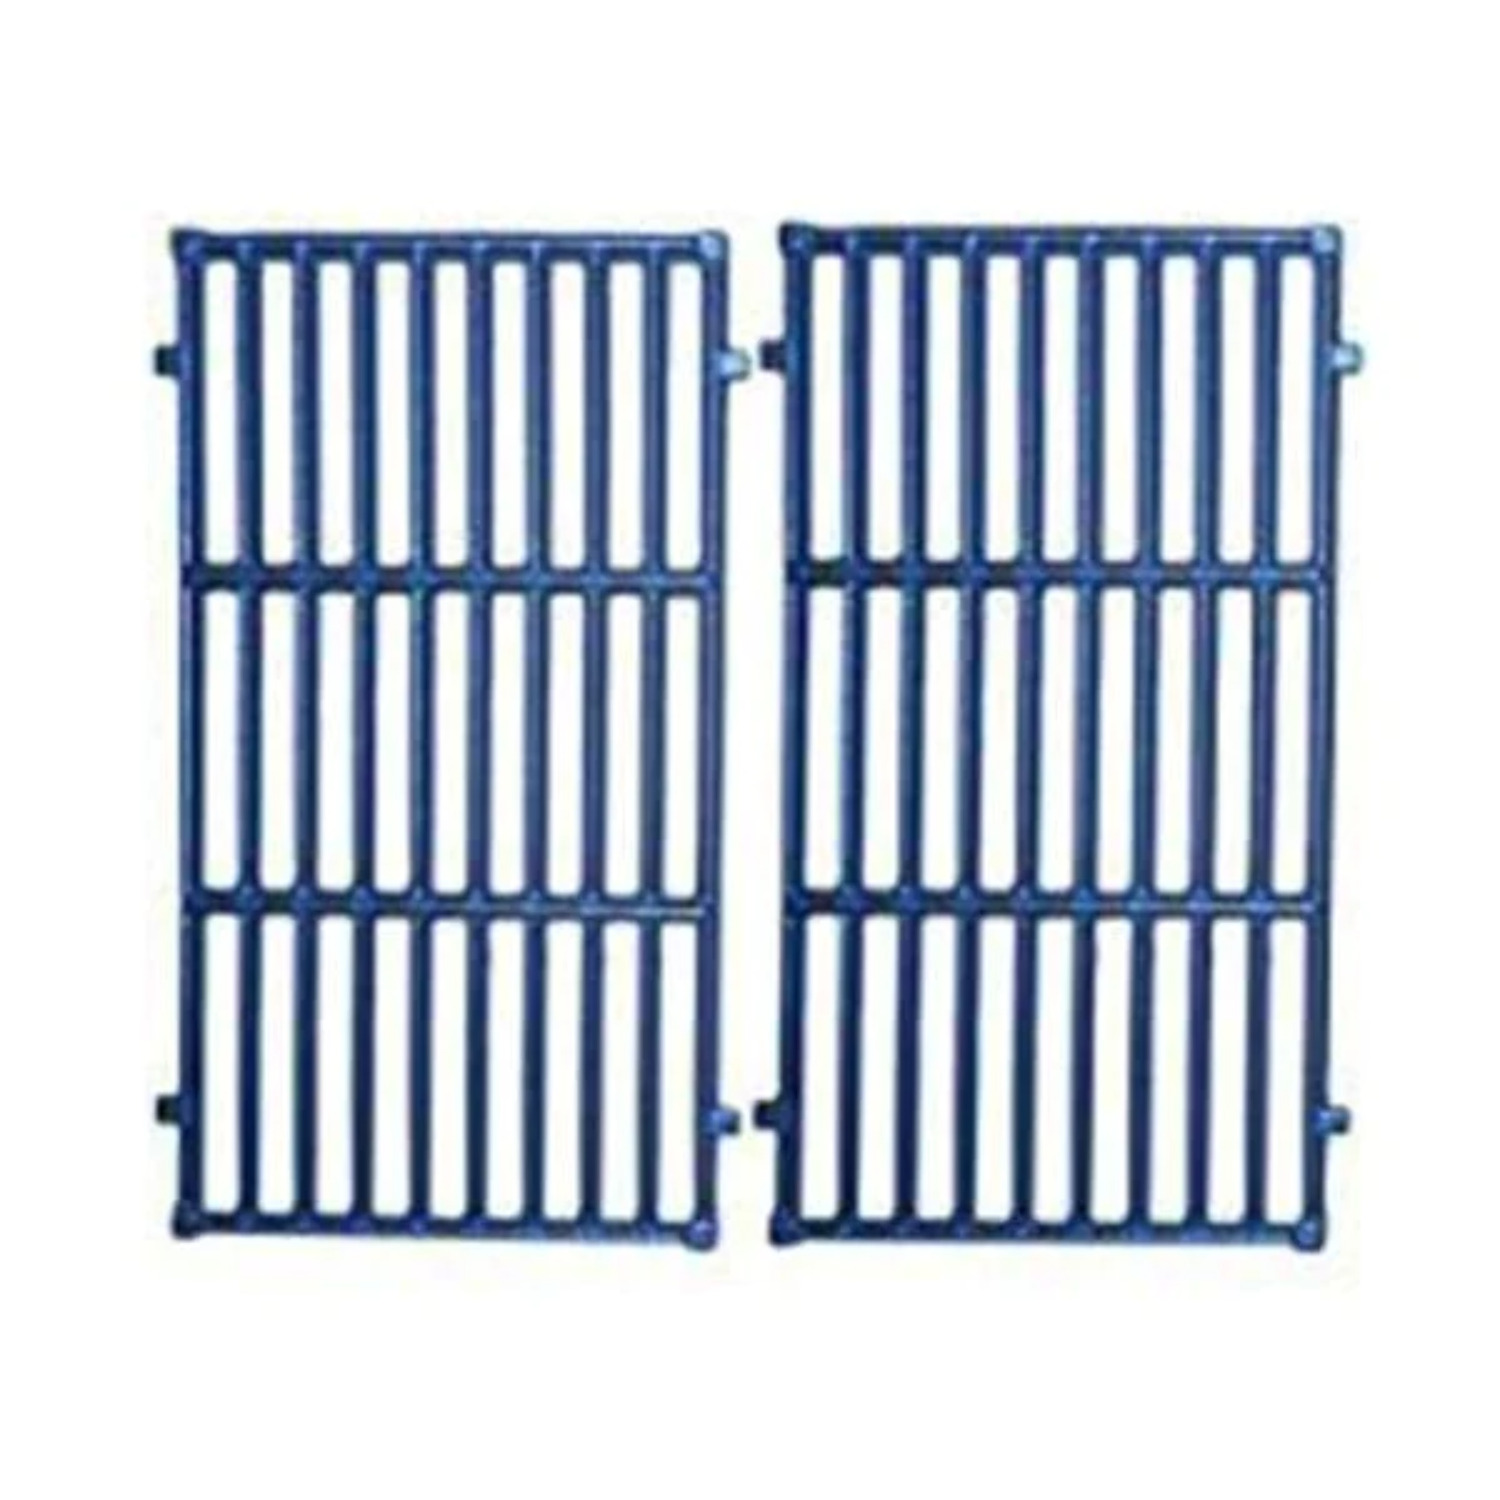 BBQ Grill Compatible With Weber Grills 2 Piece Matte Cast Iron Cooking Grates 17 7/16 x 20 1/2 BCP63832 - image 1 of 1